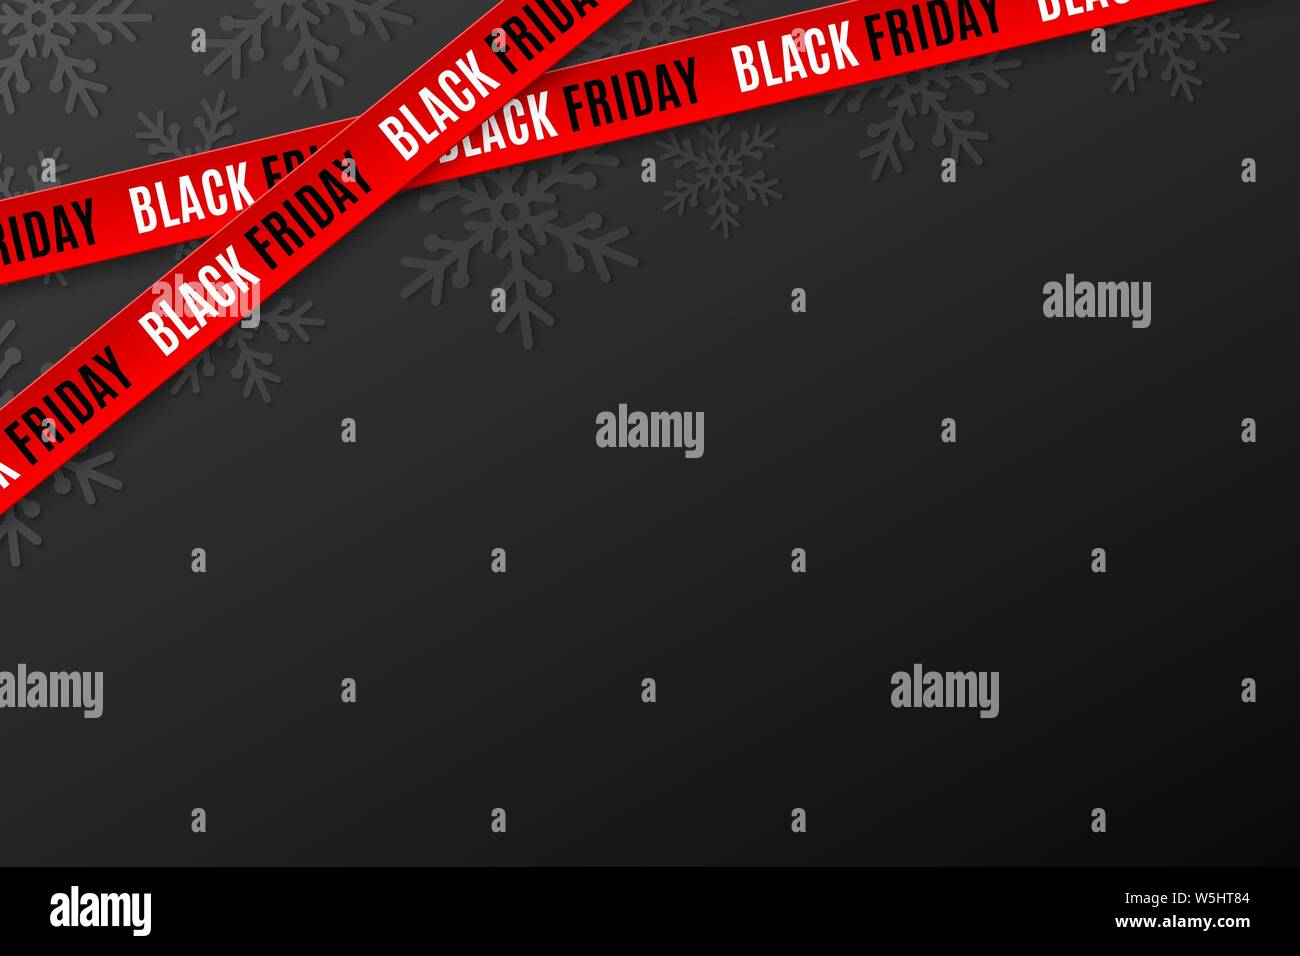 Template for Black Friday sale on black background. Crossed red ribbons with text. Snowflakes background. Super seasonal sale. Festive graphic element Stock Vector